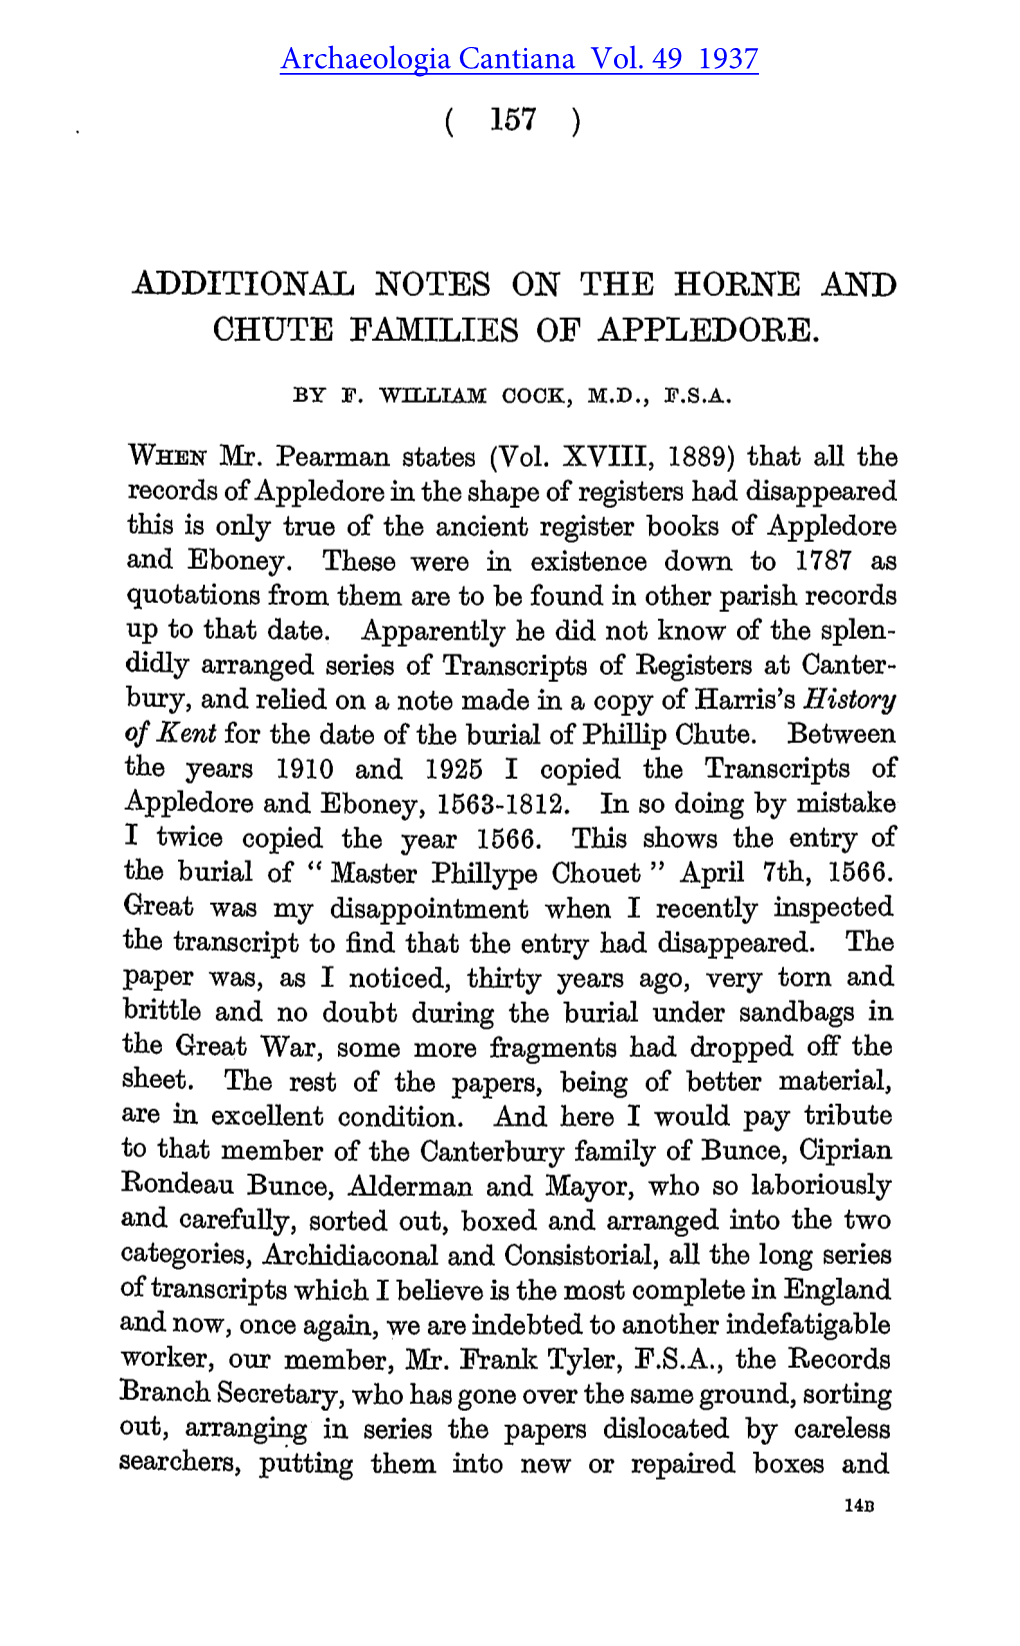 Additional Notes on the Horne and Chute Families of Appledore